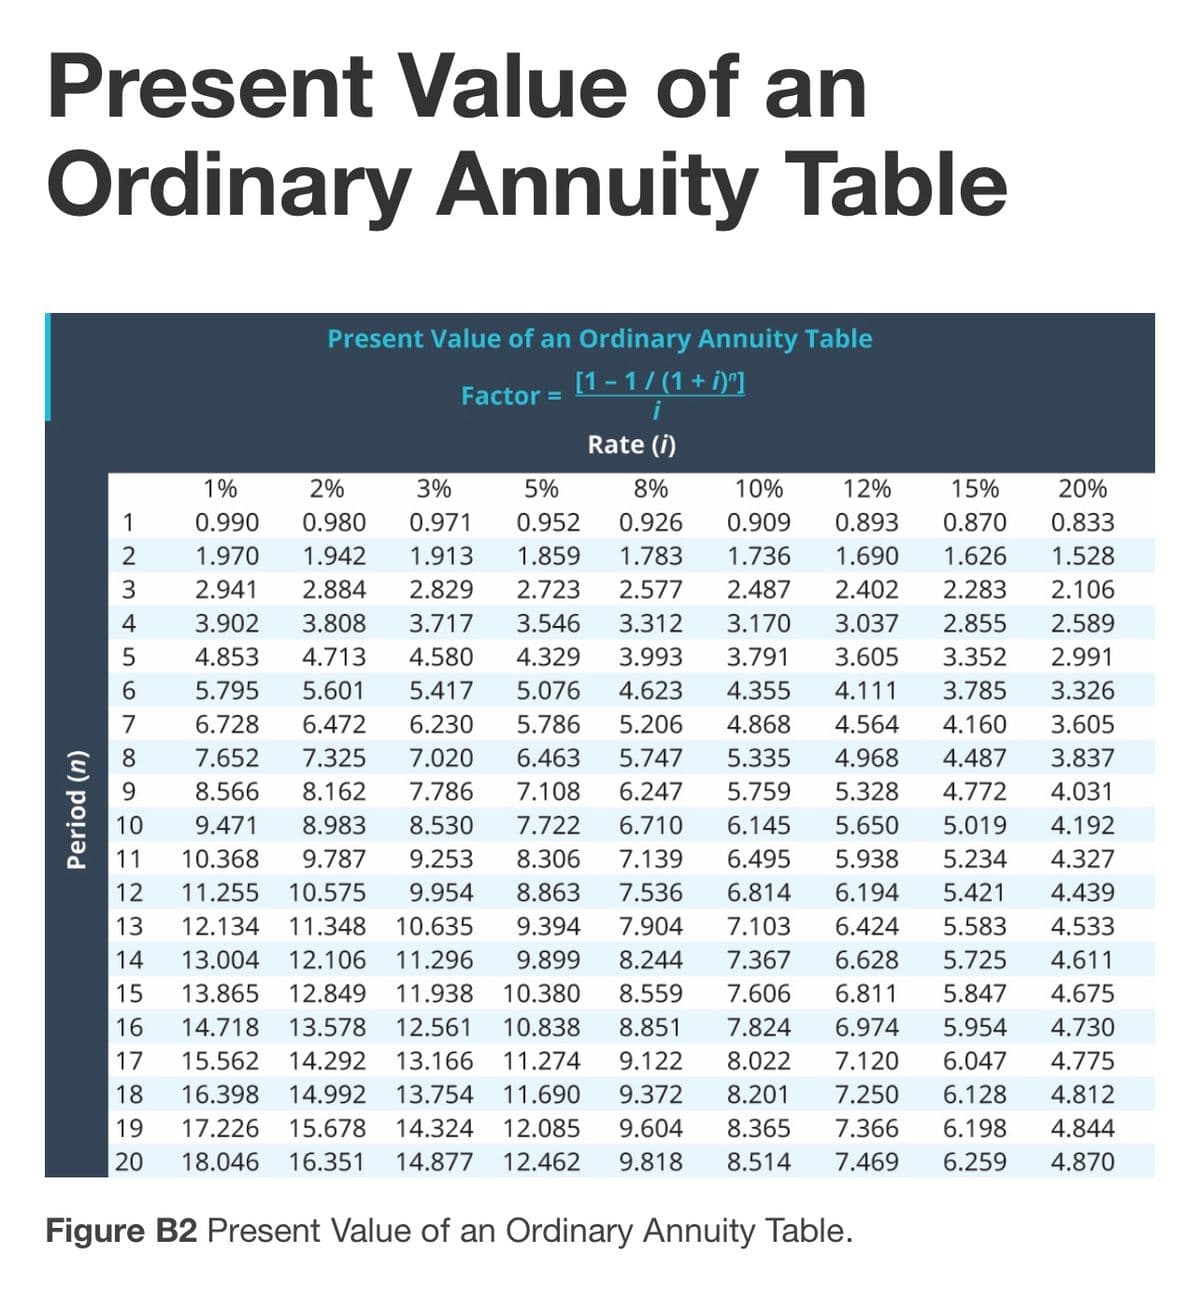 Present Value of an
Ordinary Annuity Table
Rate (i)
1%
3%
5%
8%
10%
12%
15%
20%
2%
0.990 0.980
1.970 1.942
0.971
0.952
0.926
0.909 0.893 0.870
0.833
1.913
1.859
1.783
1.736 1.690 1.626
1.528
2.941 2.884
2.829
2.723
2.577 2.487 2.402 2.283
2.106
3.902 3.808
3.717
3.546
3.312
3.170 3.037 2.855
2.589
4.853 4.713
4.580
4.329
3.993
3.791
3.605 3.352
2.991
5.795 5.601
5.417
5.076
4.623
4.355
4.111 3.785
3.326
6.728 6.472
6.230
5.786
5.206 4.868
4.564
4.160
3.605
7.652
7.325
7.020
6.463
5.747
5.335
4.968 4.487
3.837
9
8.566
8.162
7.786 7.108 6.247
5.759
5.328 4.772
4.031
10
9.471
8.983
8.530
7.722
6.710
6.145 5.650
5.019 4.192
11
10.368
9.787 9.253
8.306
7.139
6.495 5.938
5.234
4.327
12
11.255 10.575 9.954
8.863
7.536 6.814
6.194
5.421
4.439
13
12.134
11.348 10.635
9.394
7.904
7.103
6.424
5.583 4.533
14
13.004
9.899 8.244
7.367
6.628
5.725
4.611
15
13.865 12.849
12.106 11.296
11.938 10.380 8.559
12.561 10.838 8.851
7.606 6.811 5.847
4.675
16
14.718 13.578
7.824
6.974 5.954
4.730
7.120 6.047
4.775
6.128
4.812
17 15.562 14.292 13.166 11.274 9.122
8.022
18 16.398 14.992 13.754 11.690 9.372 8.201 7.250
19 17.226 15.678 14.324 12.085 9.604 8.365 7.366 6.198
20 18.046 16.351 14.877 12.462 9.818 8.514
4.844
7.469
6.259
4.870
Figure B2 Present Value of an Ordinary Annuity Table.
Period (n)
Present Value of an Ordinary Annuity Table
[1 - 1 / (1 + i)"]
Factor
12345678